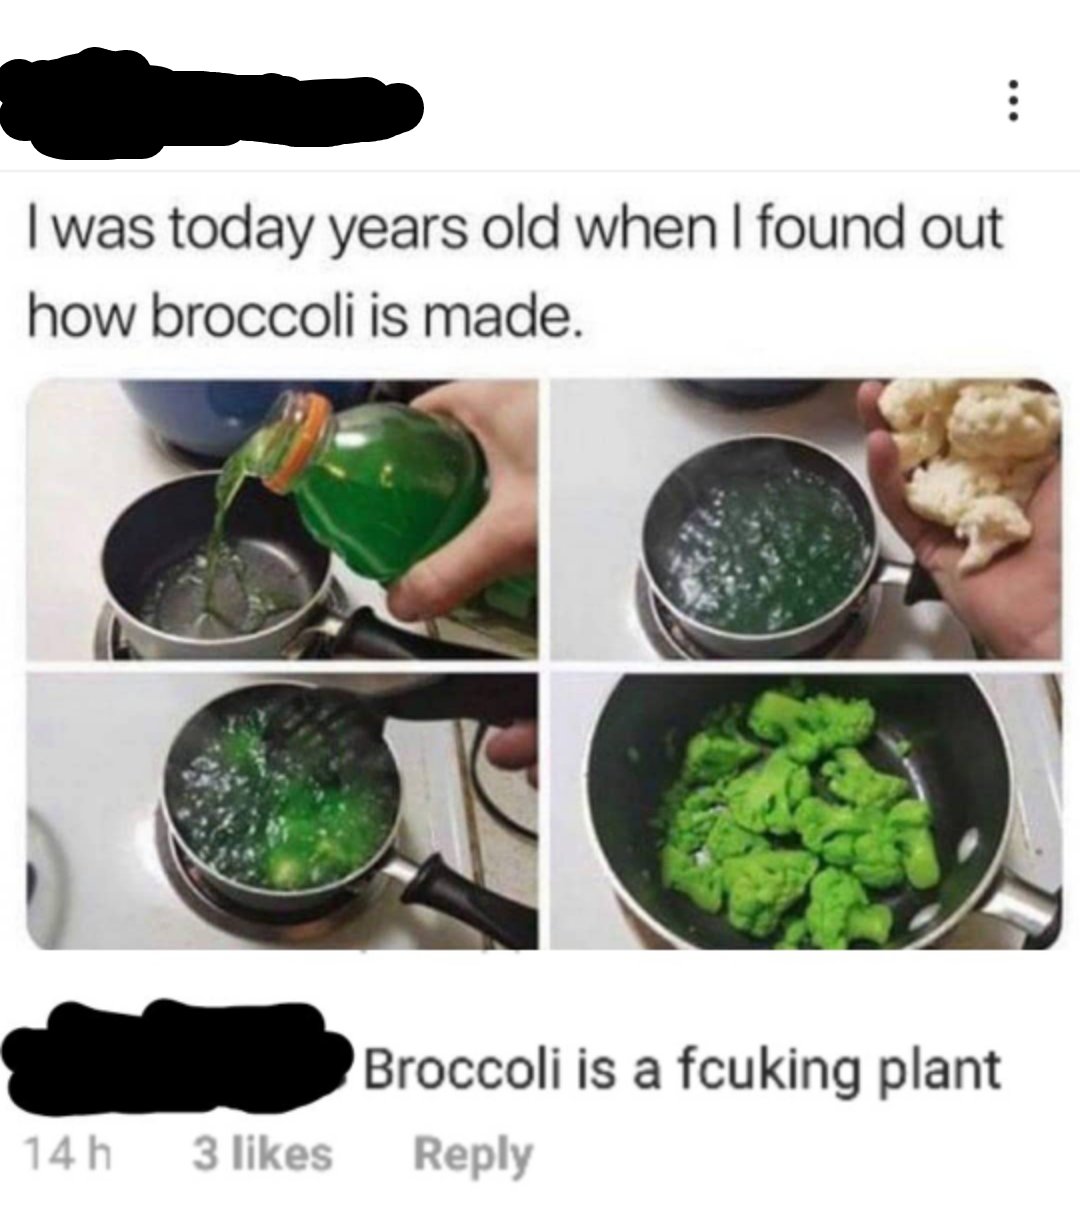 today years old when i found out - I was today years old when I found out how broccoli is made. Broccoli is a fcuking plant 14h 3